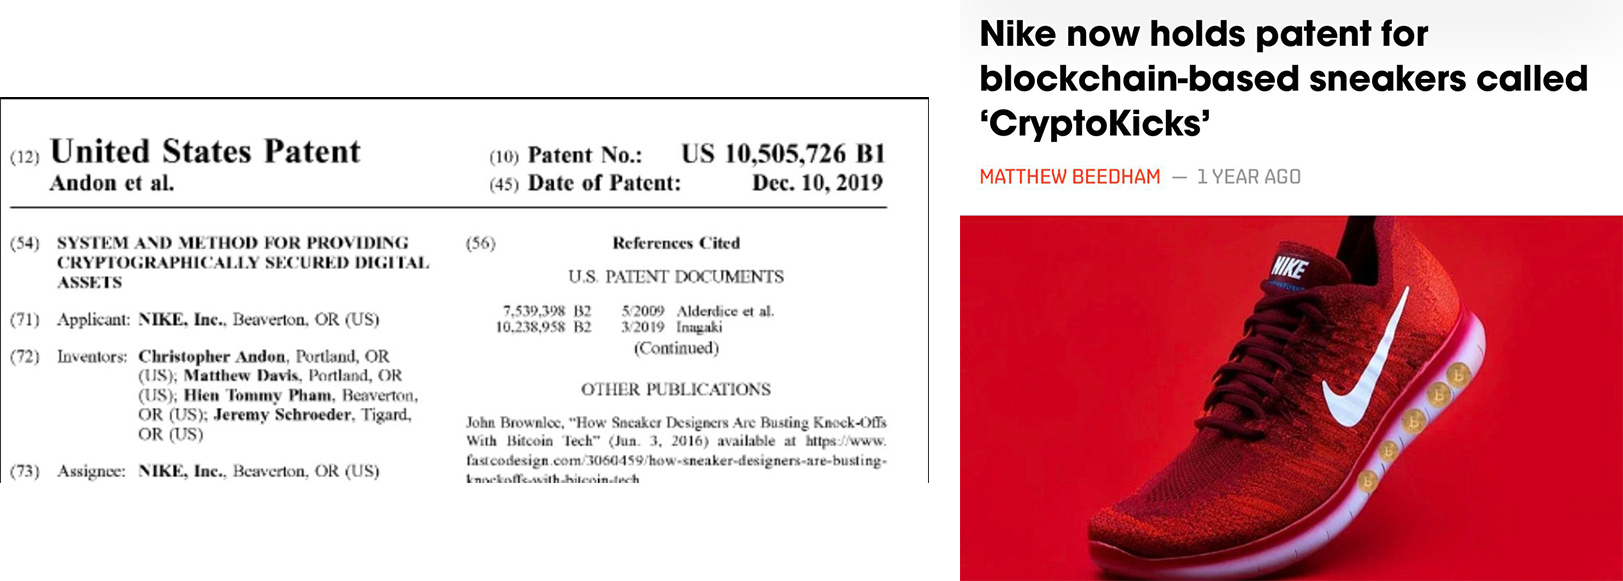 Nike now holds patent for blockchain-based sneakers called 'CryptoKicks